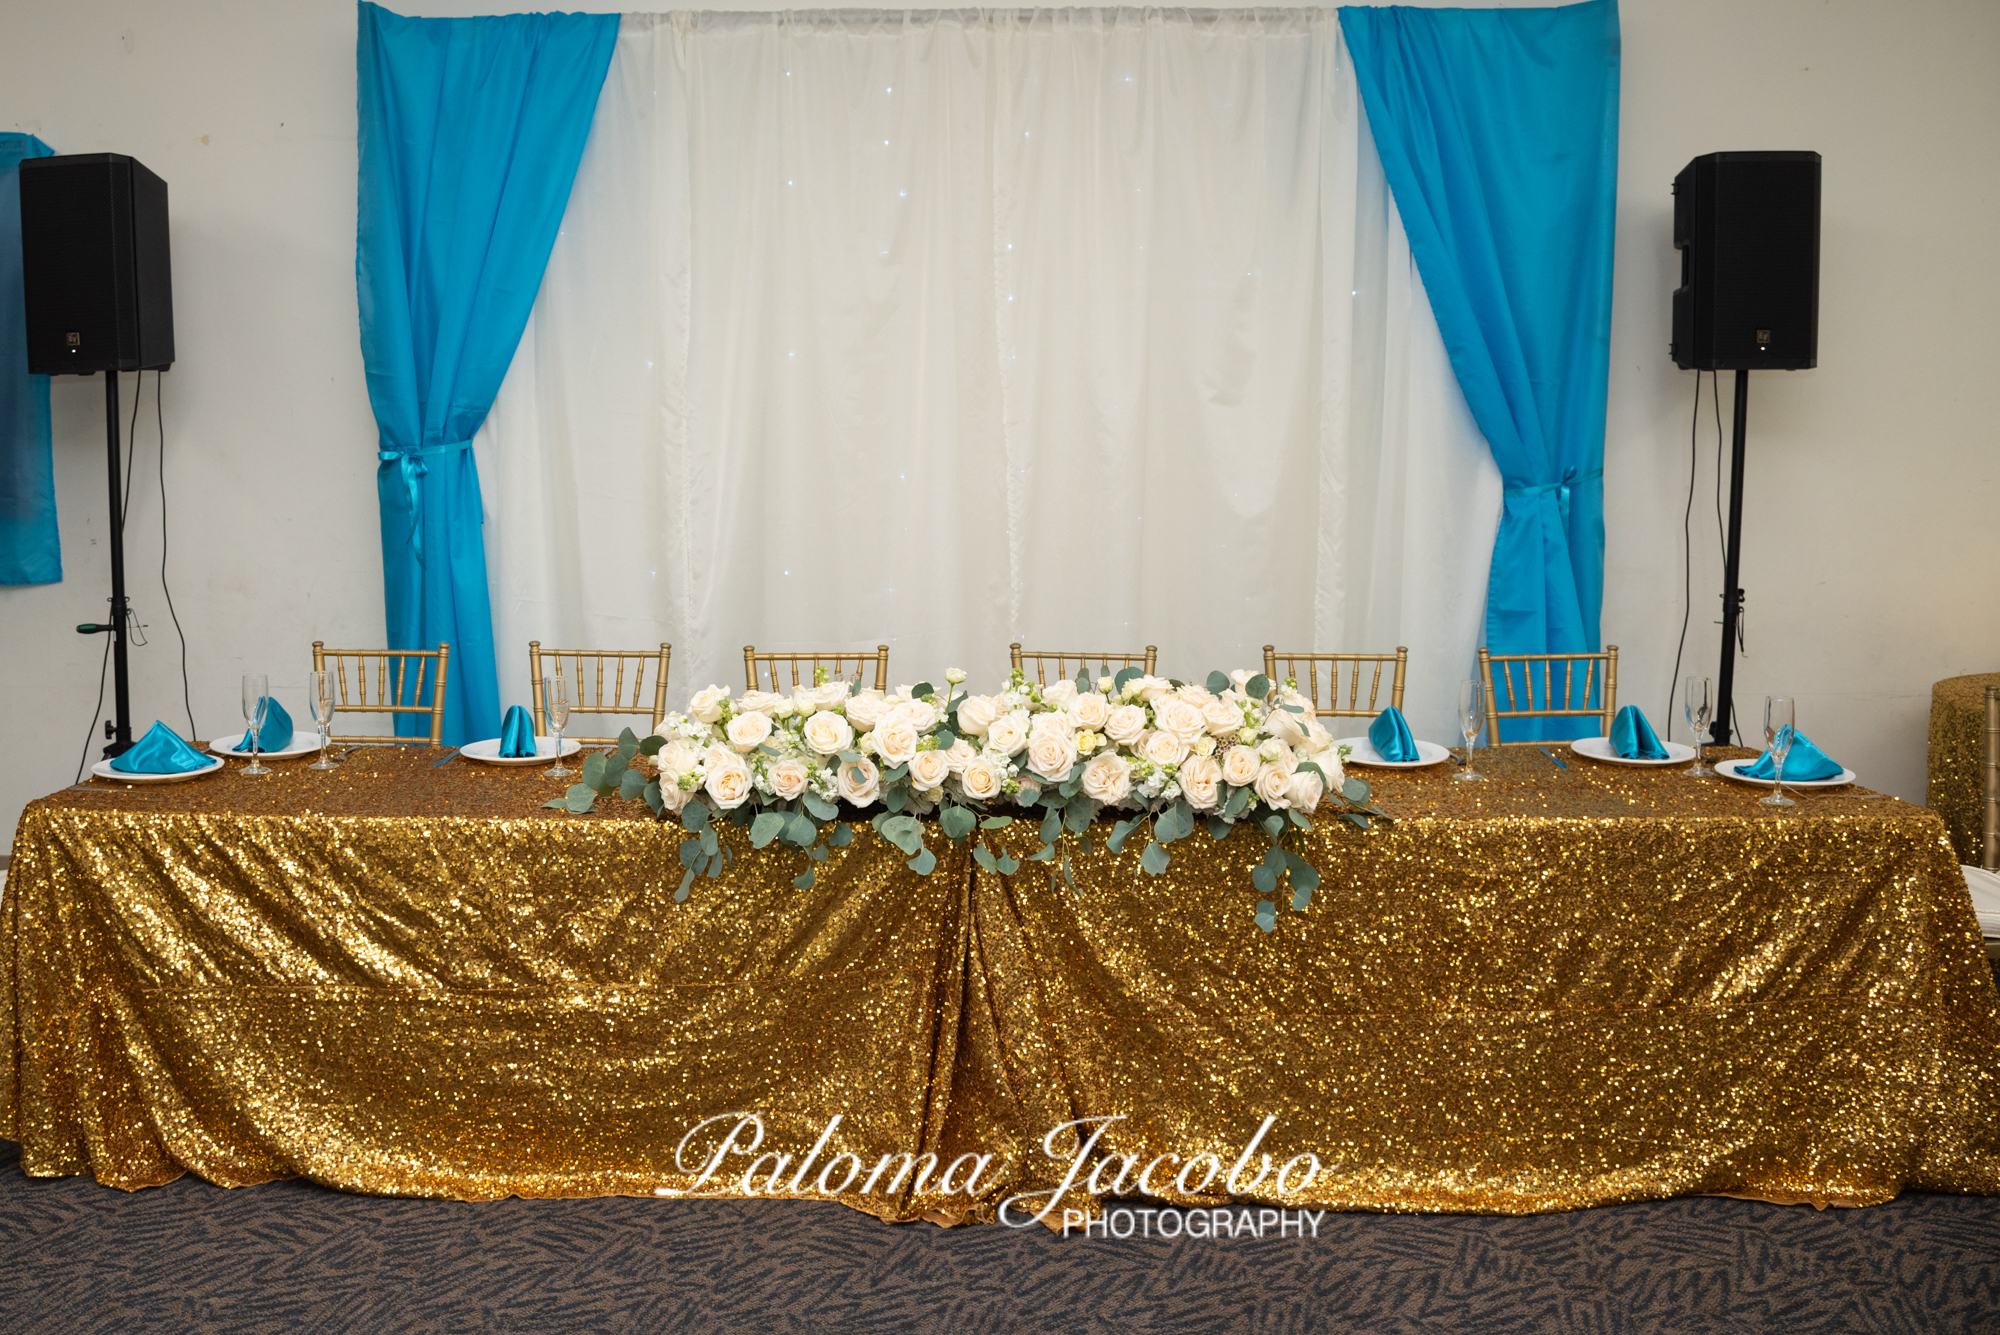 Quinceanera table setup by Paloma Jacobo Photography